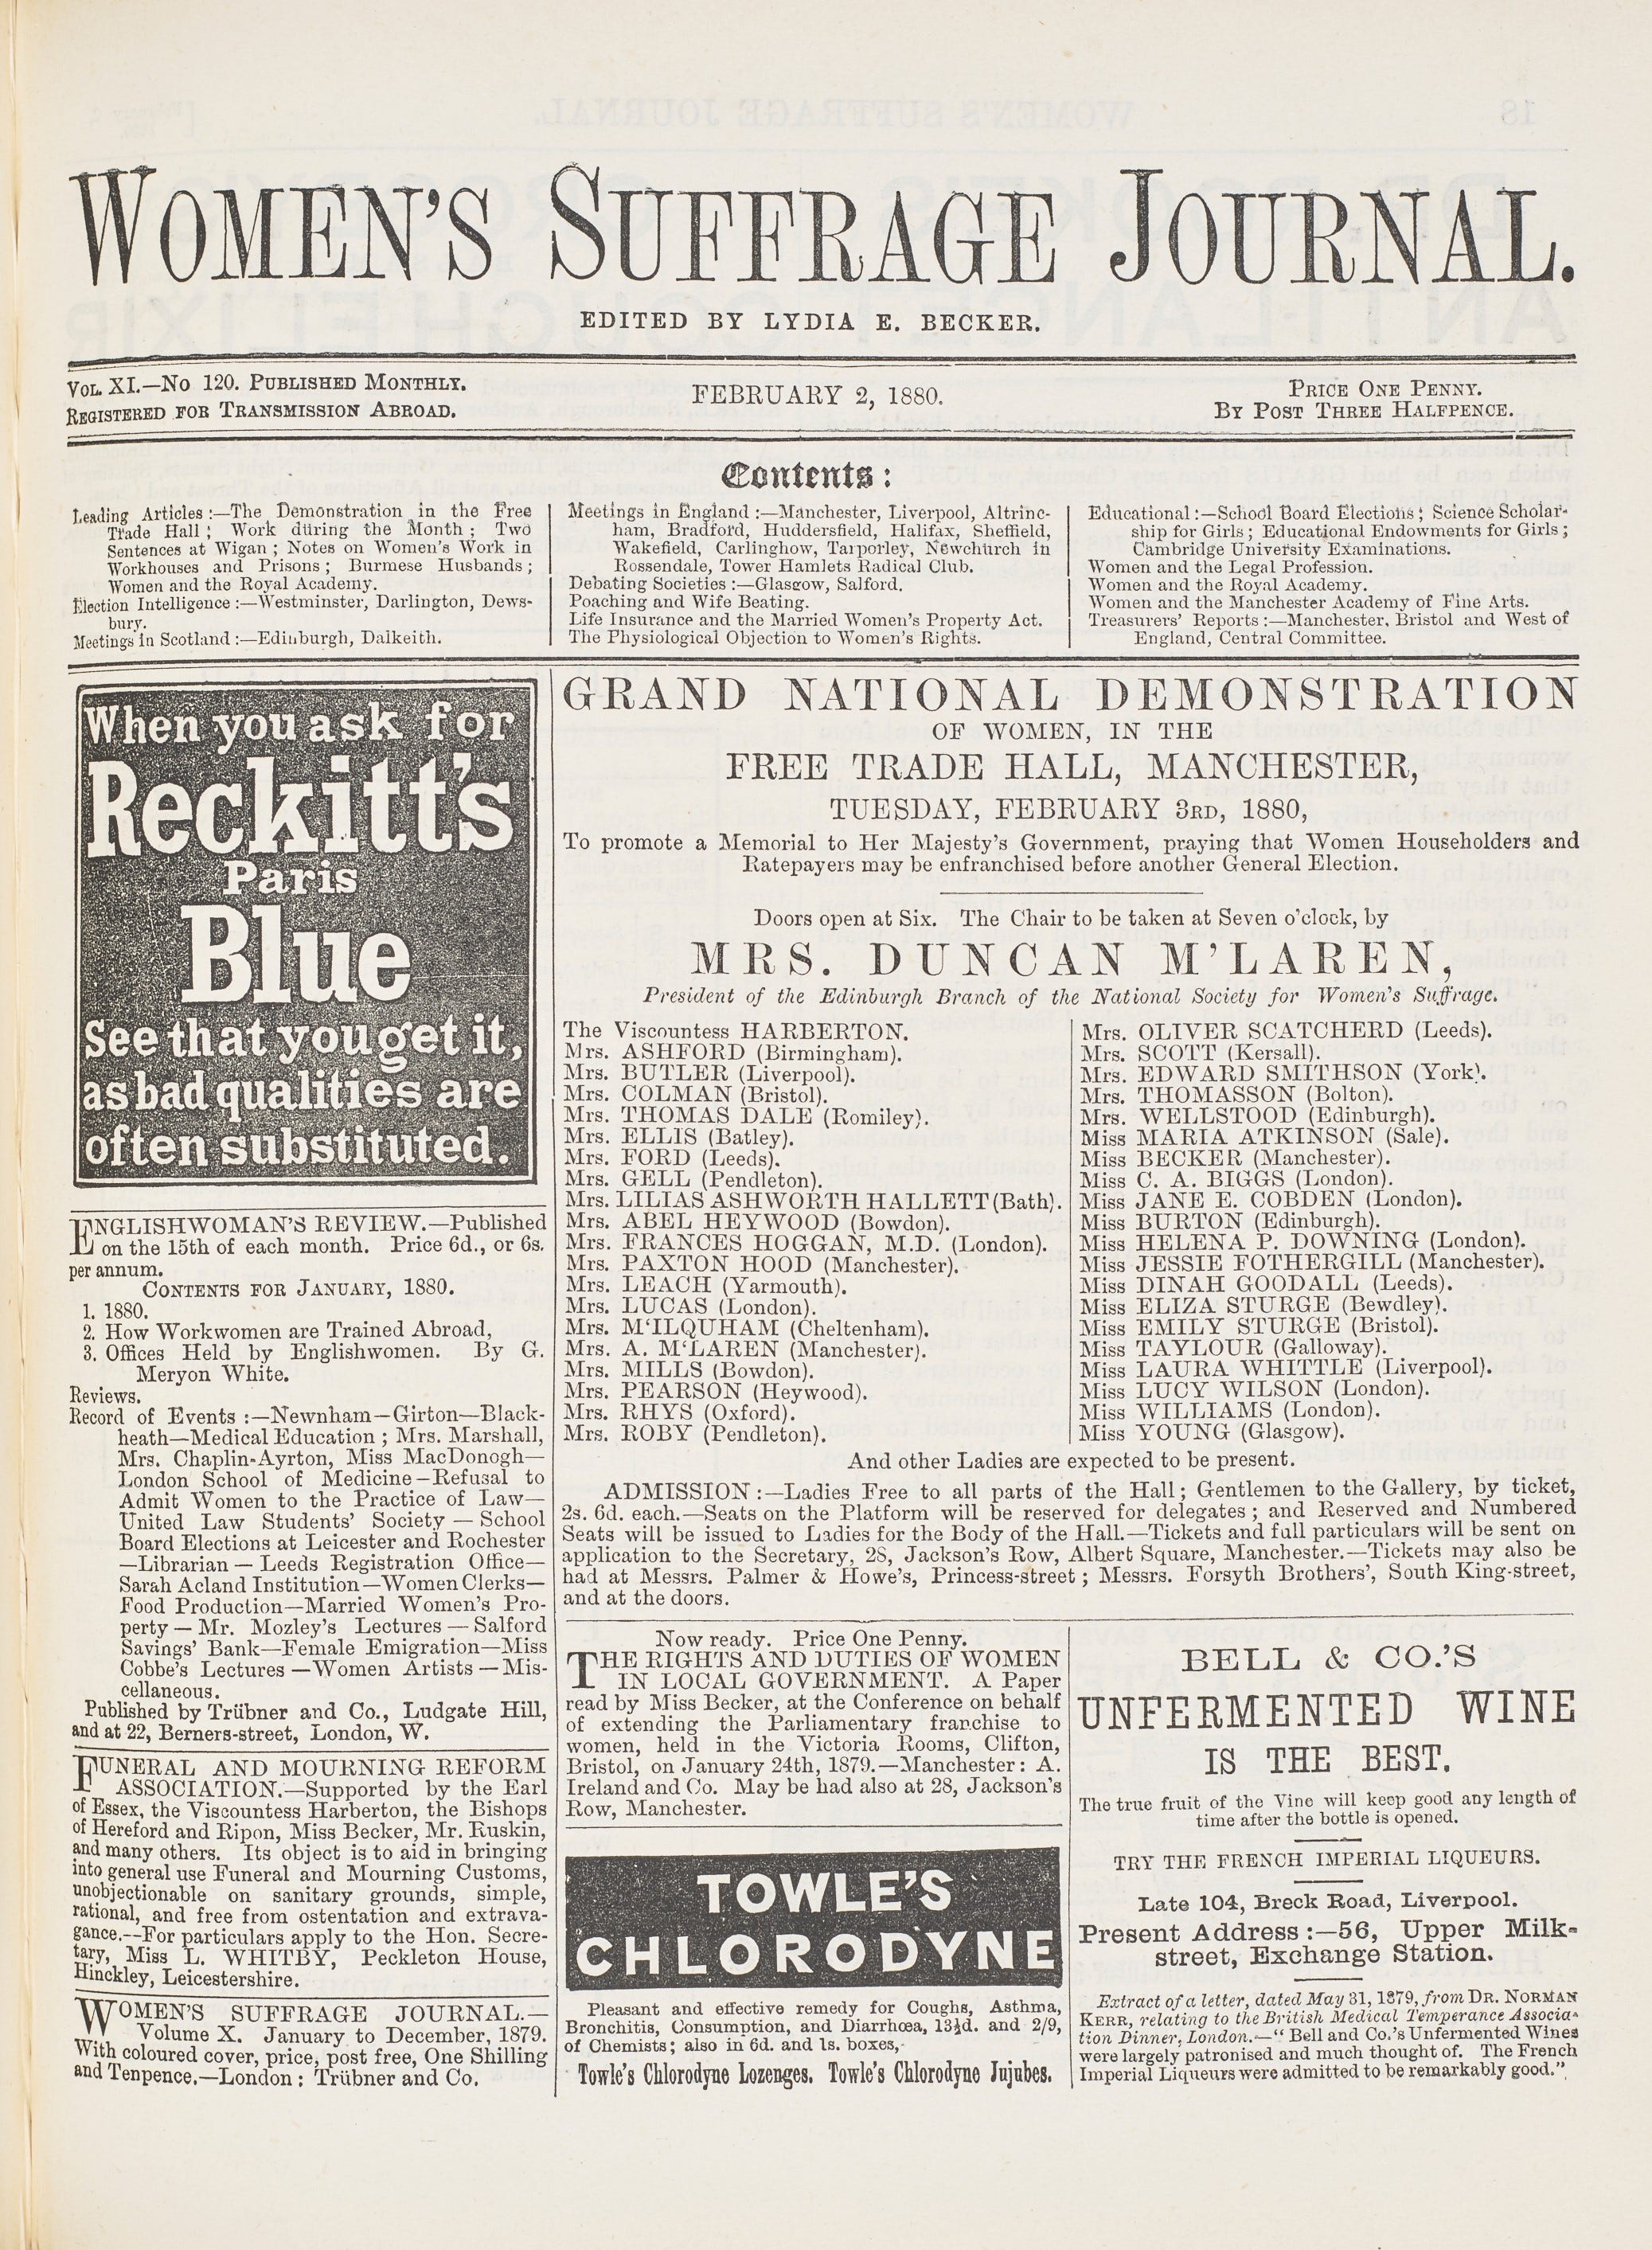 Periodical title-page printed in three columns, including issue contents and a variety of advertisements.